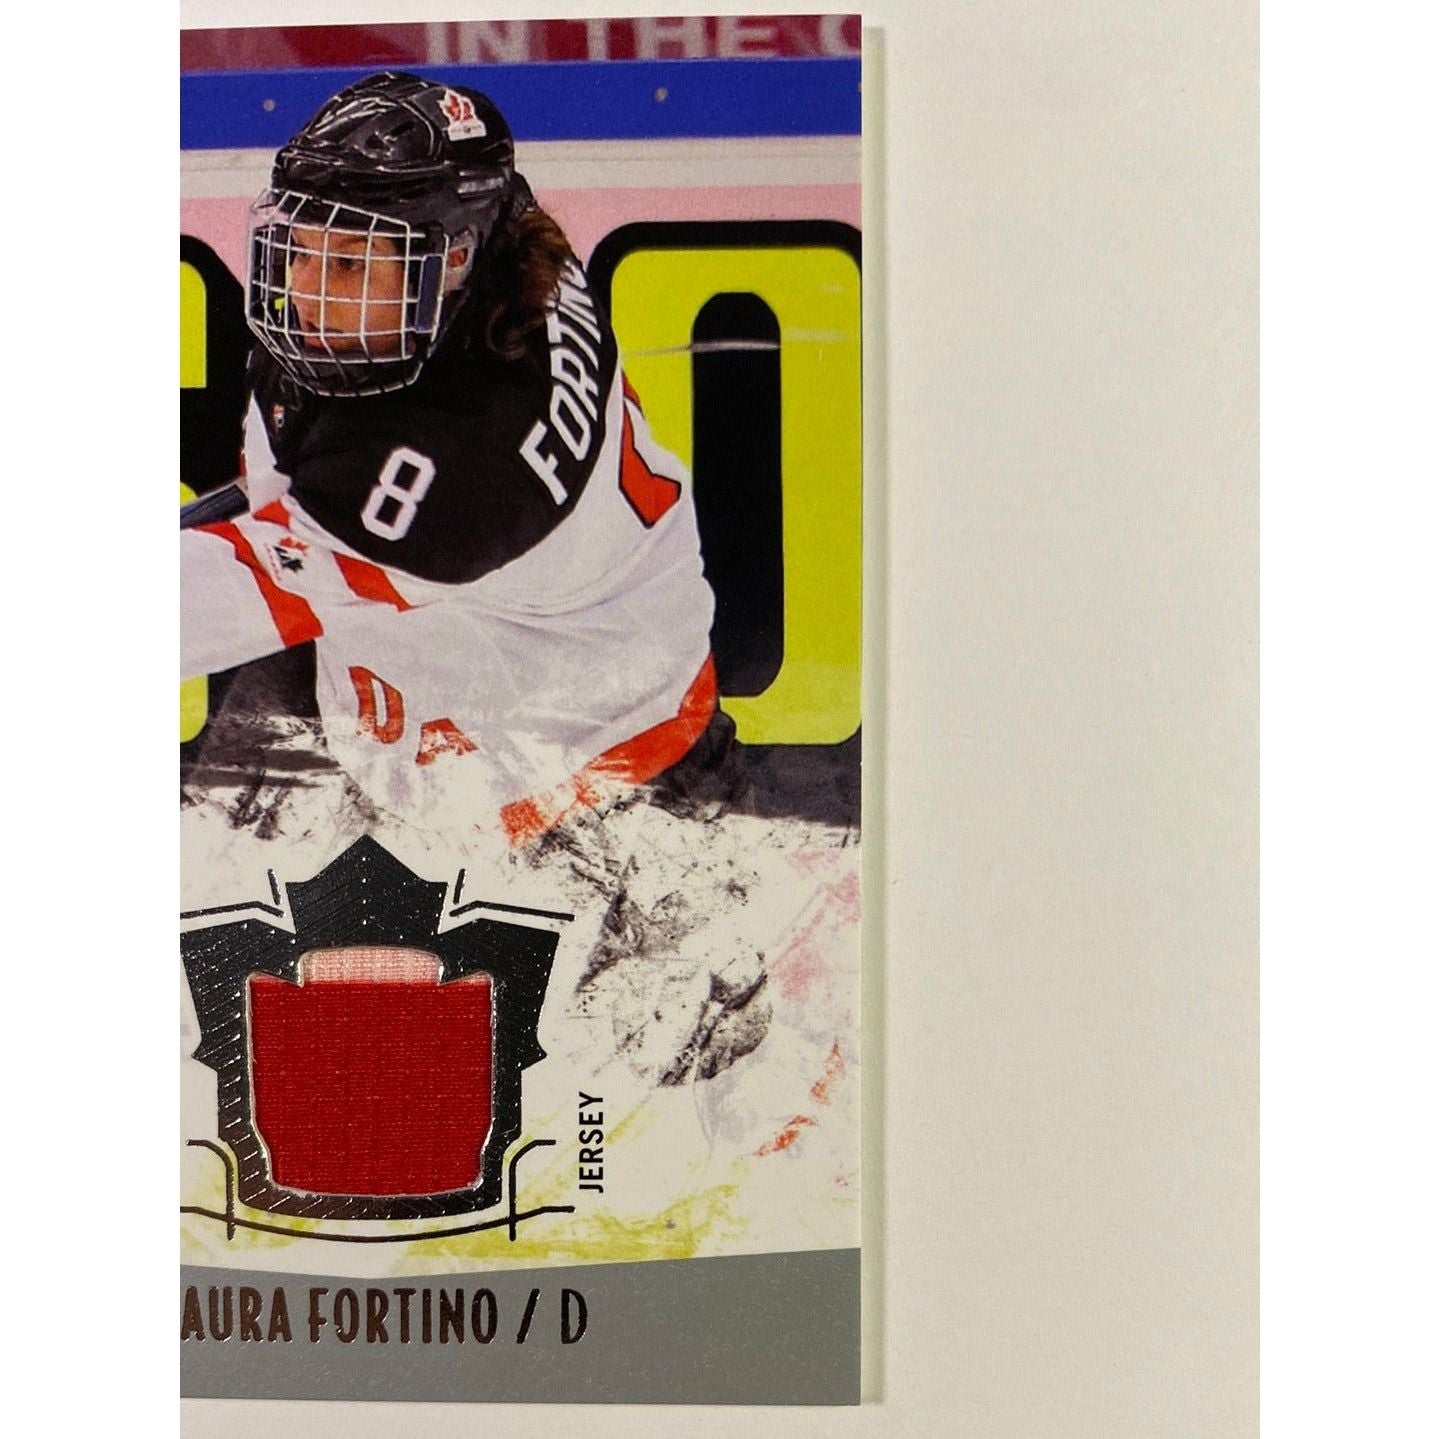  2014-15 Team Canada Women Laura Fortino Team Canada Patch  Local Legends Cards & Collectibles